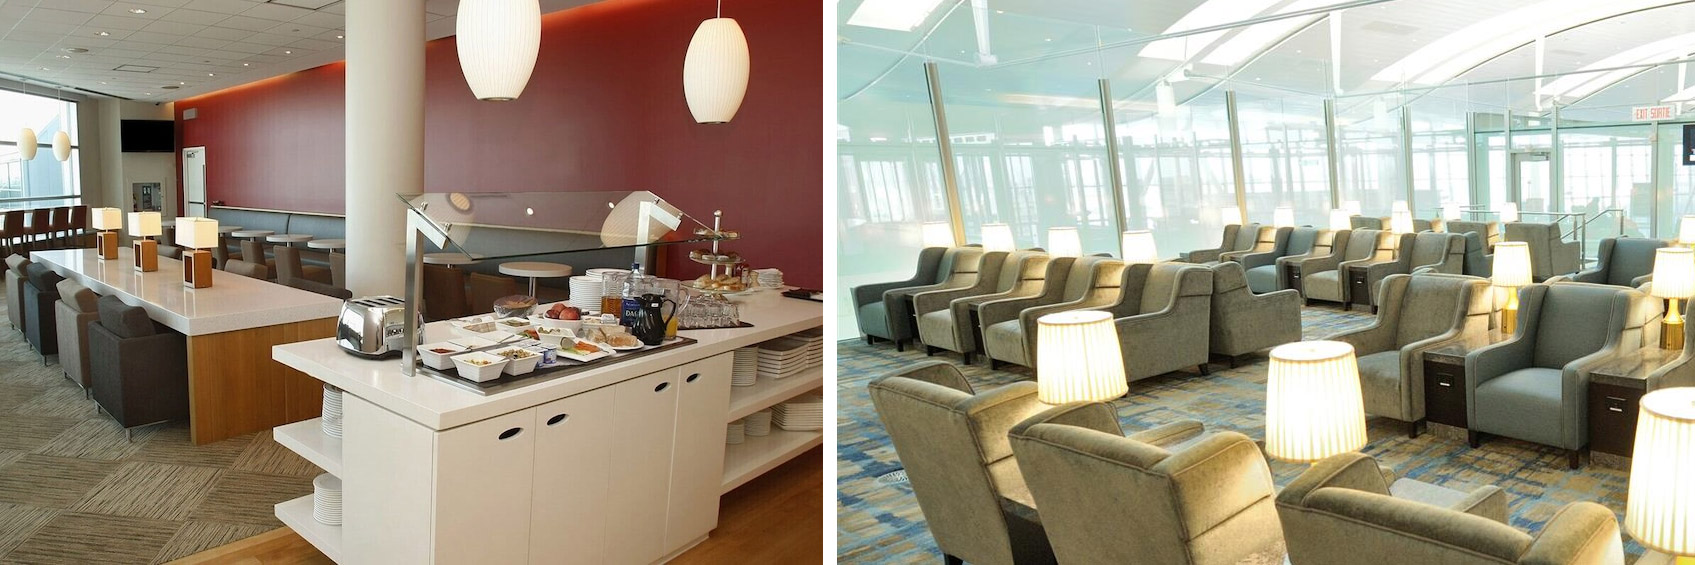 Lounges at Toronto Pearson Airport